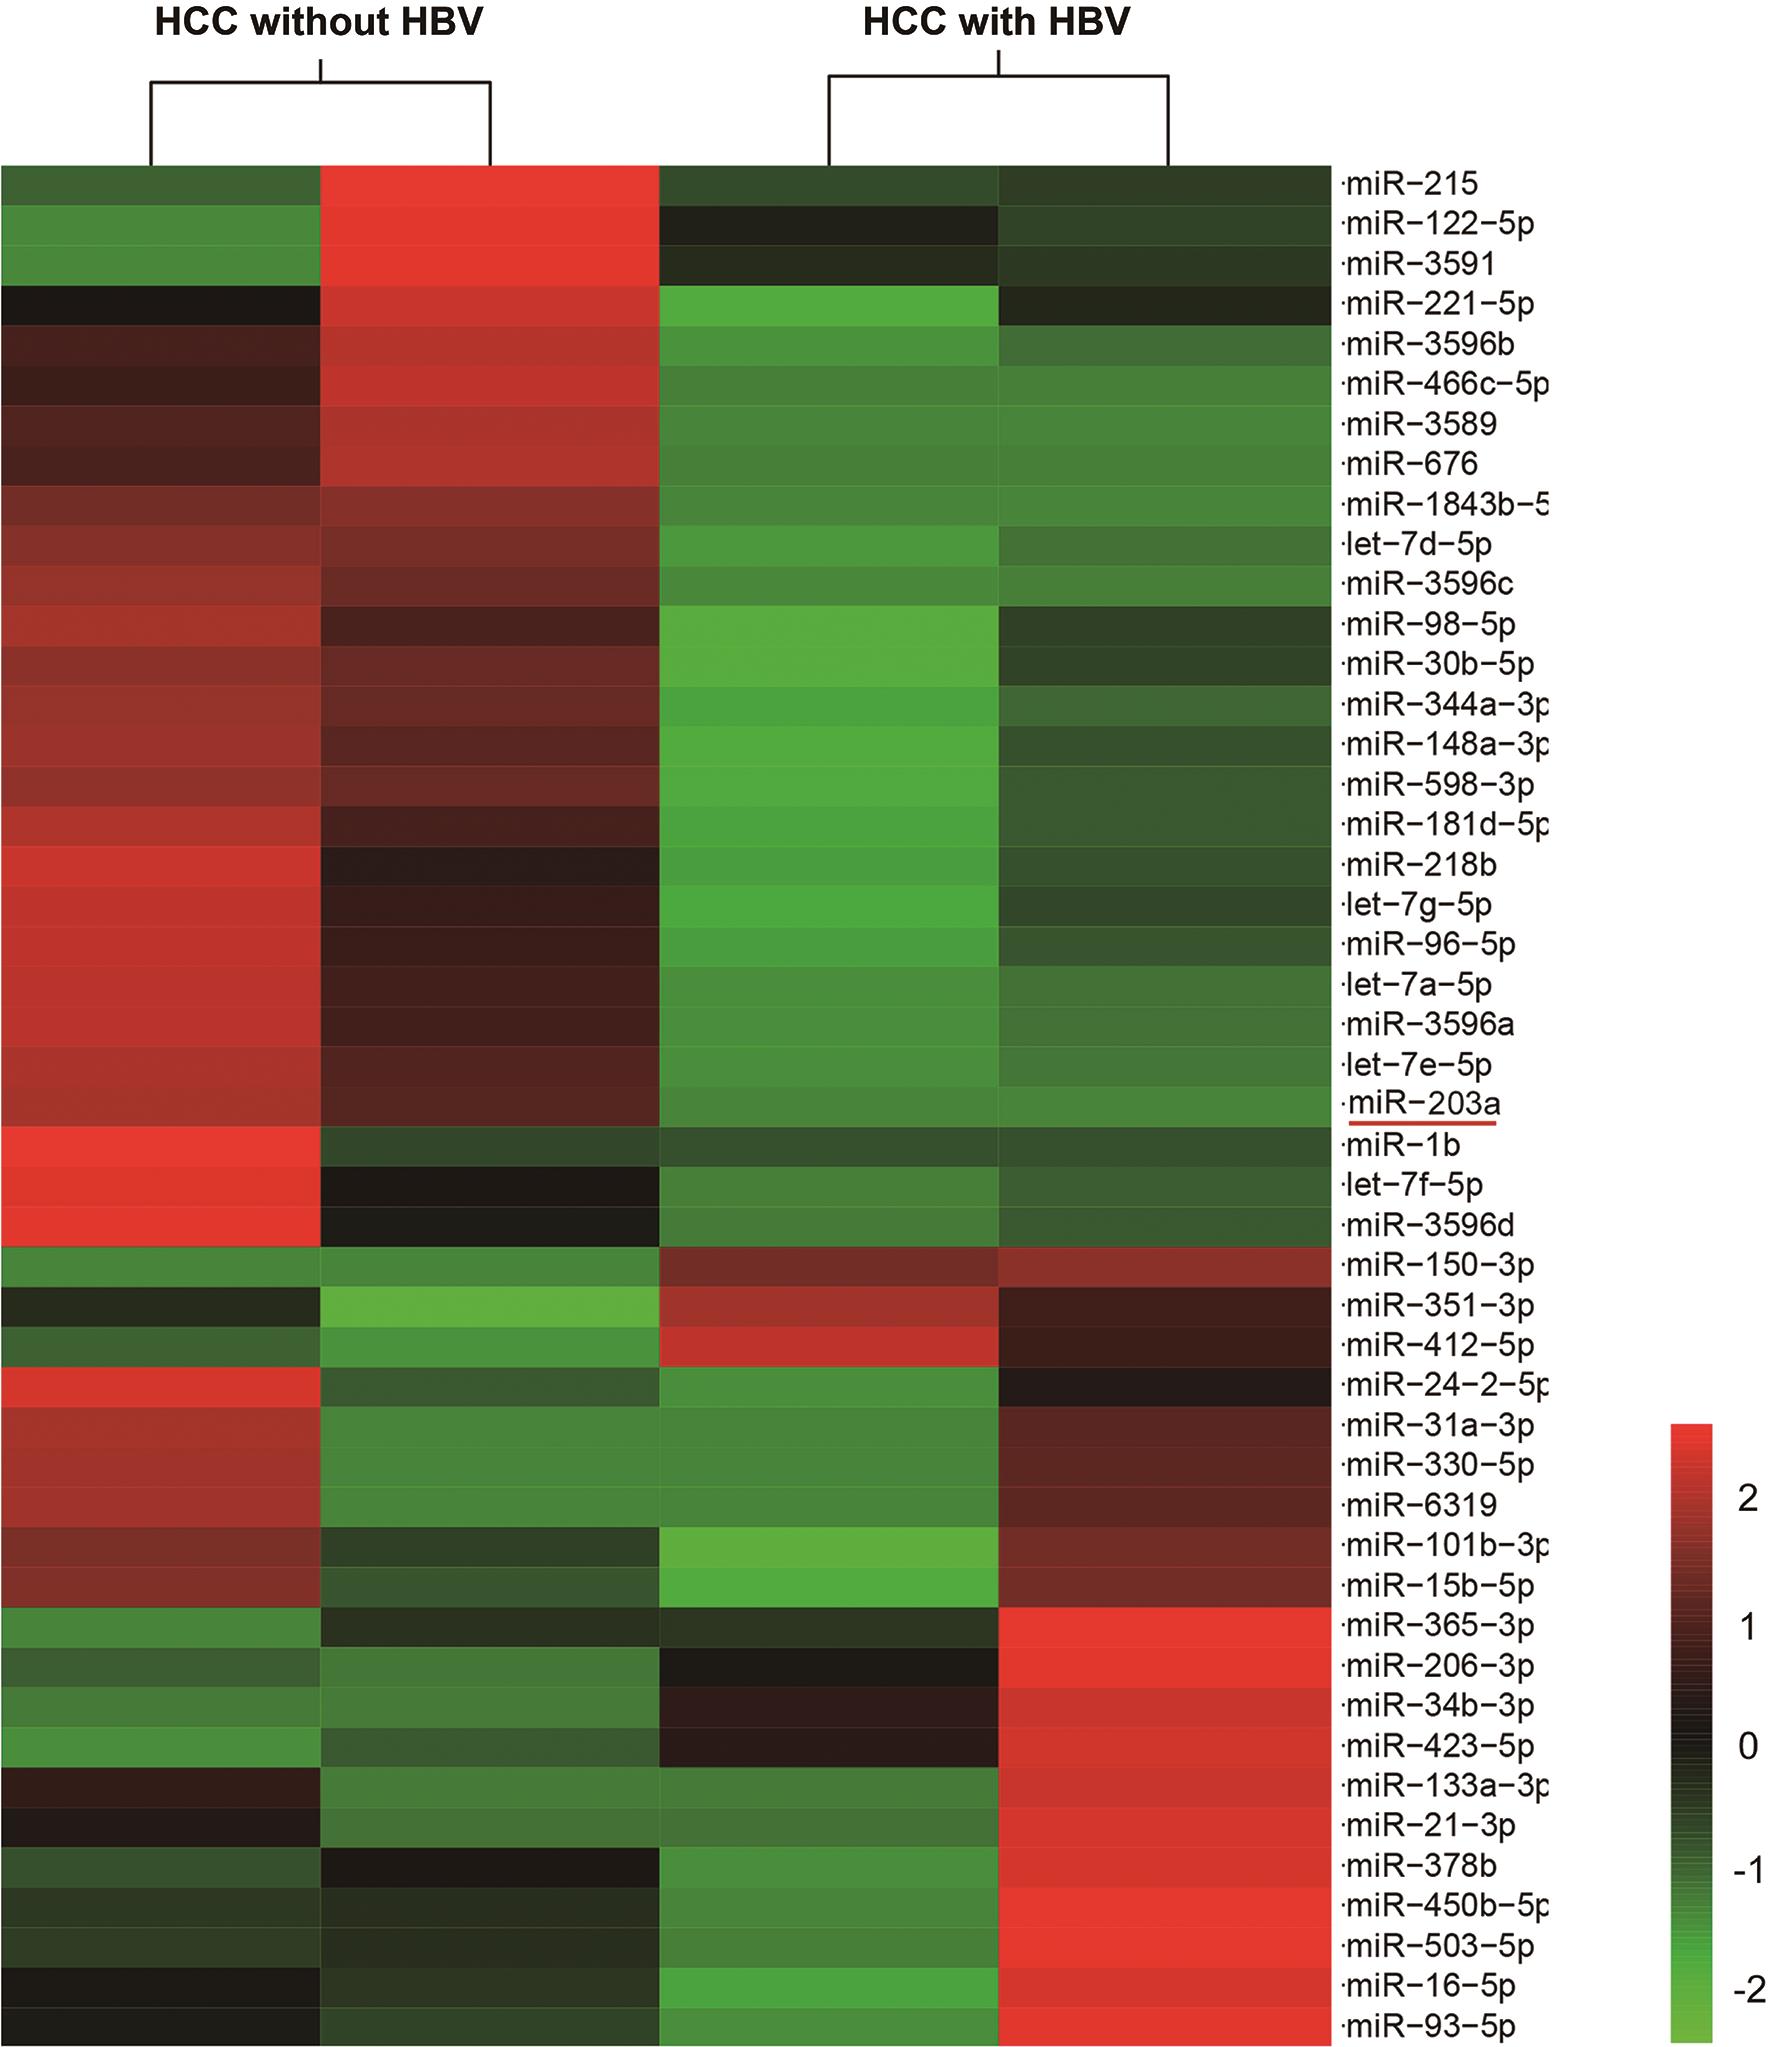 The most upregulated/down-regulated microRNAs in HBV-positive and HBV-negative liver cancer tissues identified by microRNA microarray.